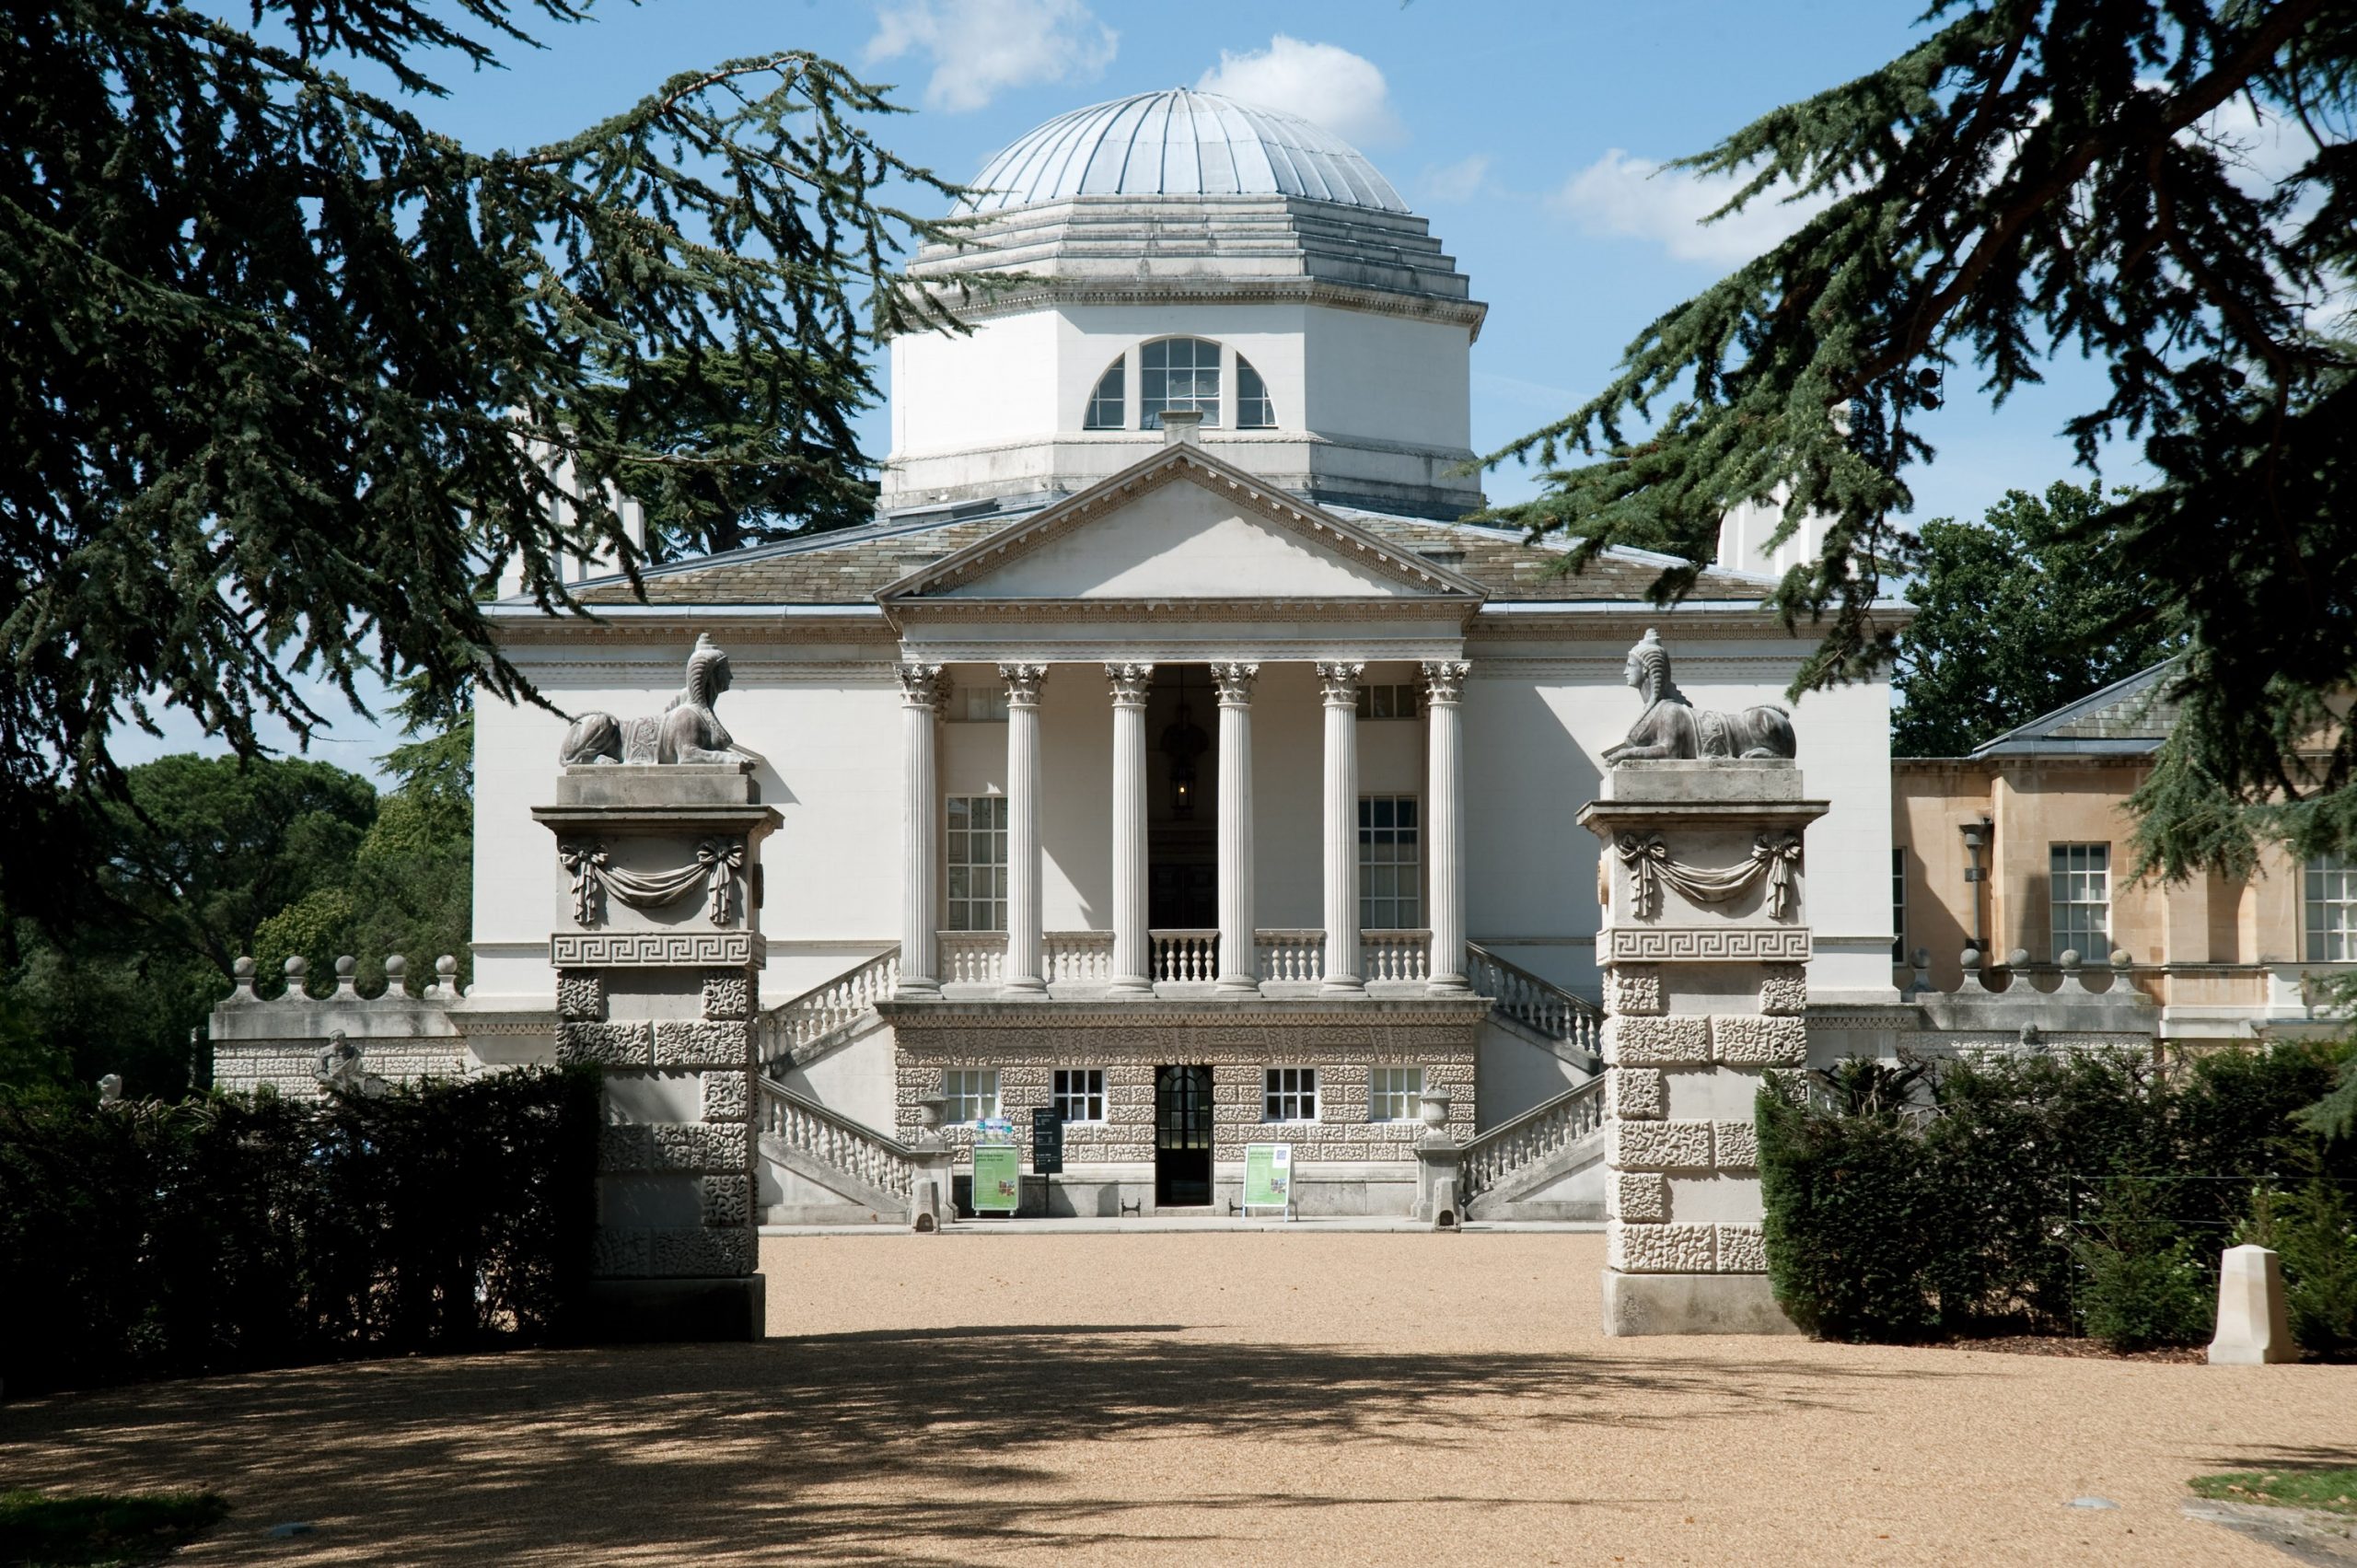 The Chiswick House is an 18th-century villa that will make any wedding feel like one from a Jane Austen novel